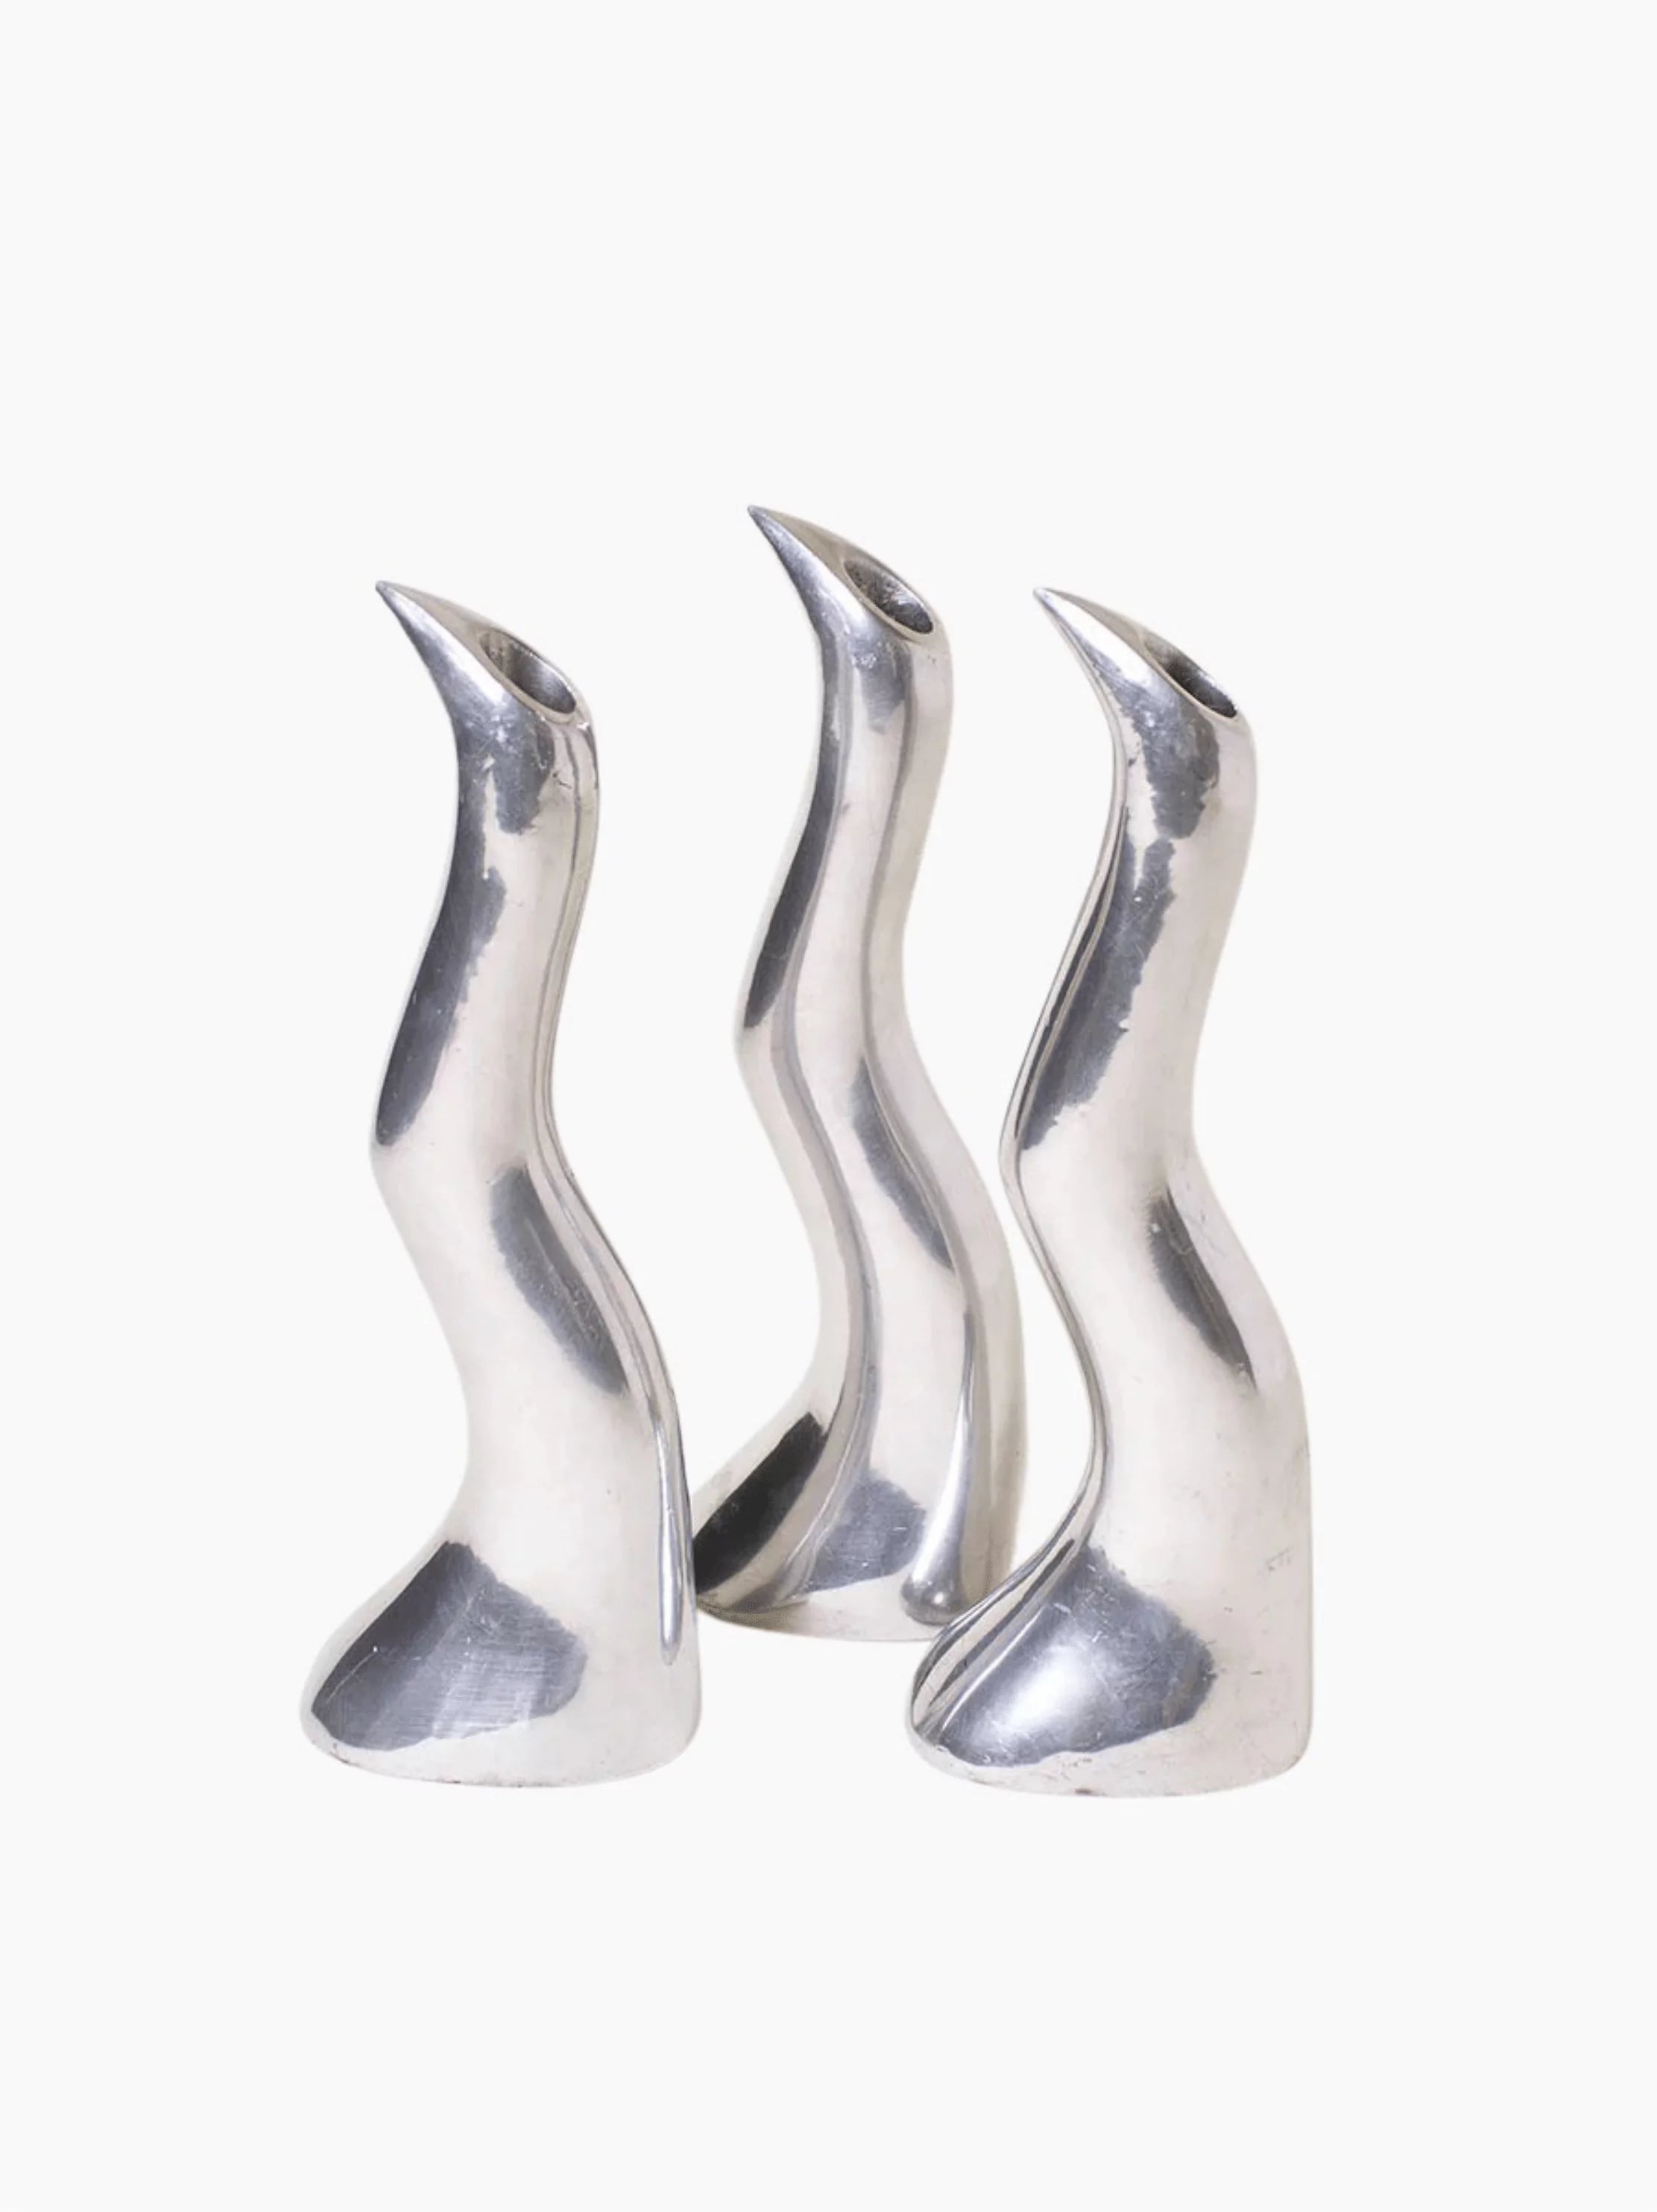 Anna Everlund Candle Holders Set of 3